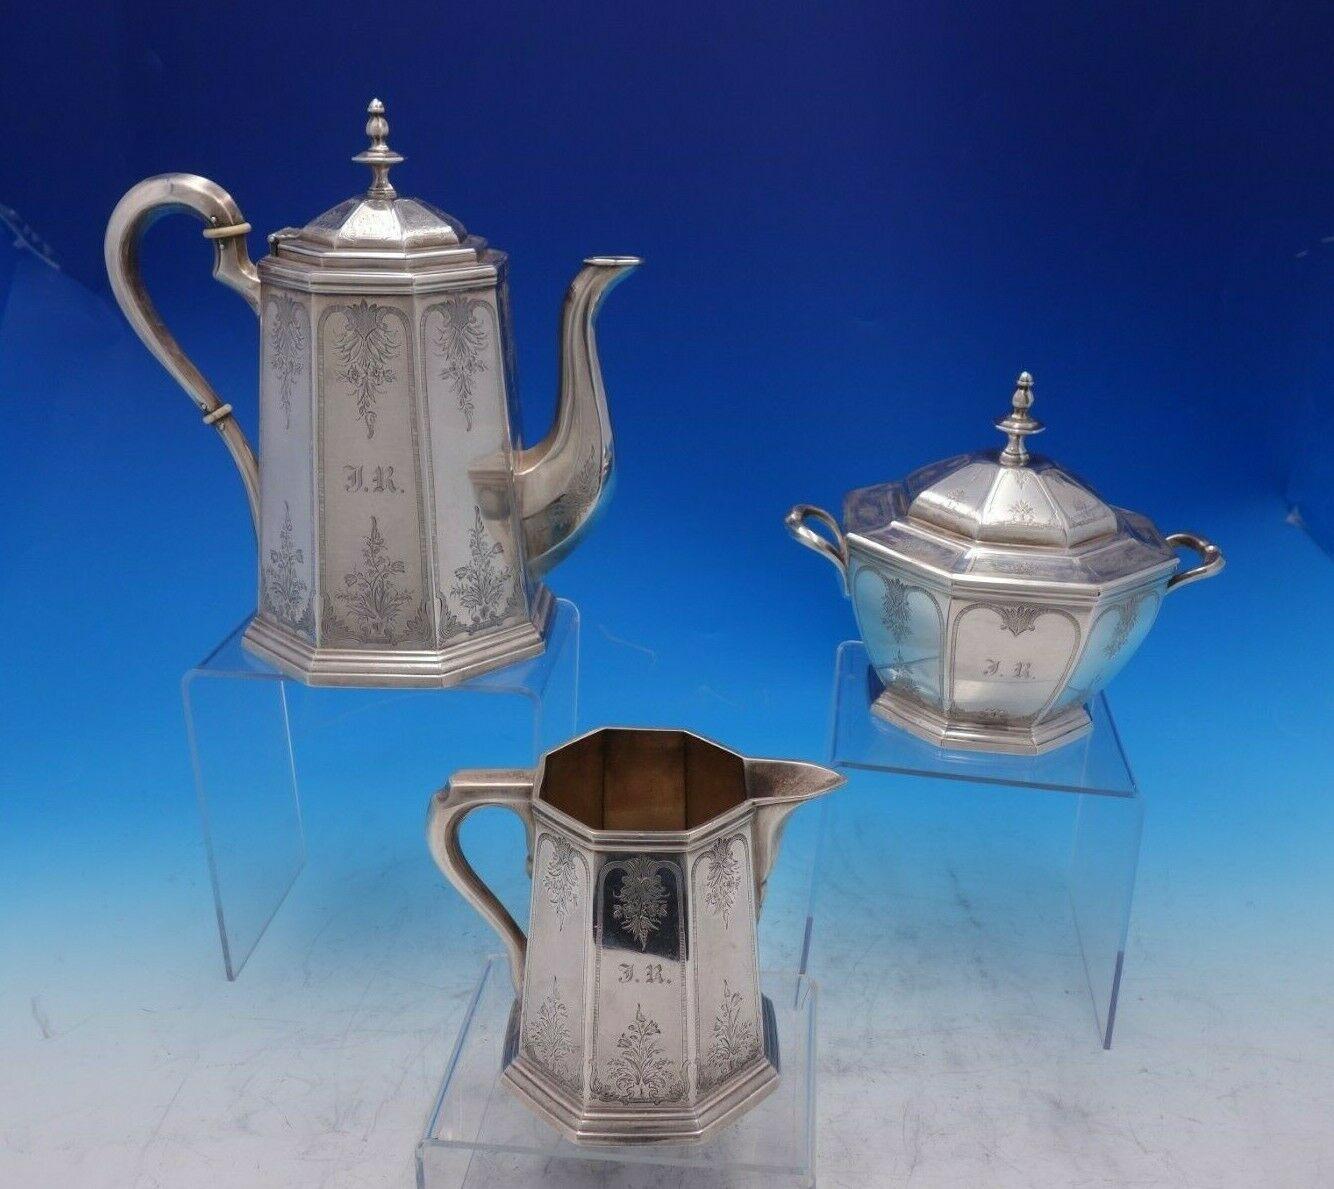 John Wendt and Augustus Rogers

Fabulous John Wendt and Augustus Rogers coin silver 3-piece tea set marked #402 made in Boston in 1850-1859. It was retailed by Bigelow Bros and Kennard. The set is octagonal shape with each panel in a hand engraved